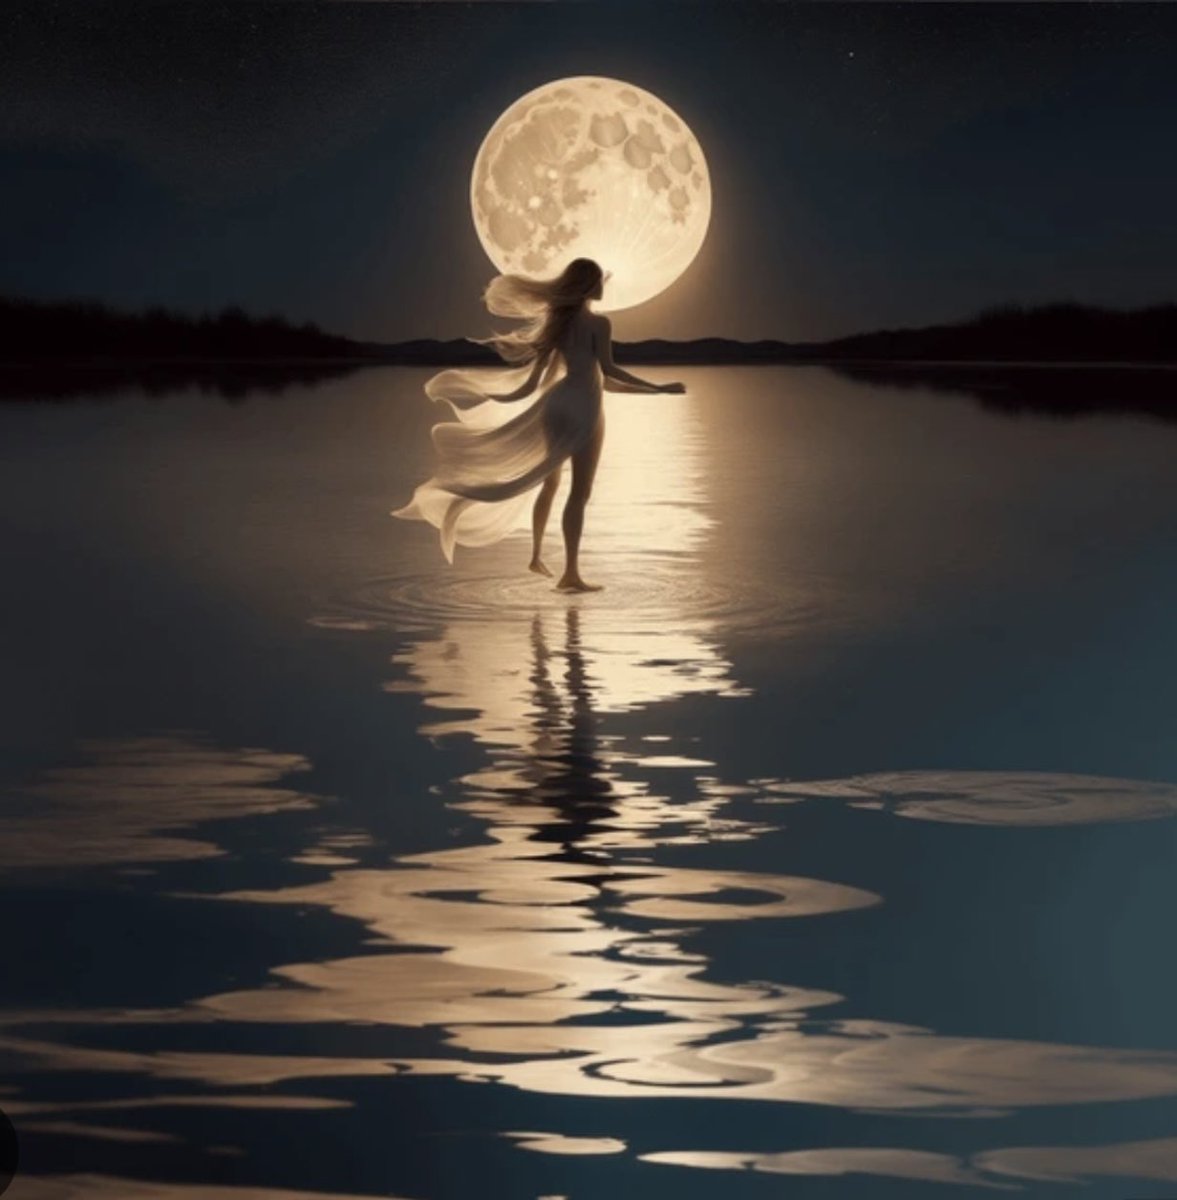 Looking up into this twilight I feel that you are too Even if just for this moment I'm together with you~D time passed in your silence earnest prayers i sought guidance fates beloved divine communion surrendering forgotten moonlight reunion #fairytalepoets #moonlightreunion